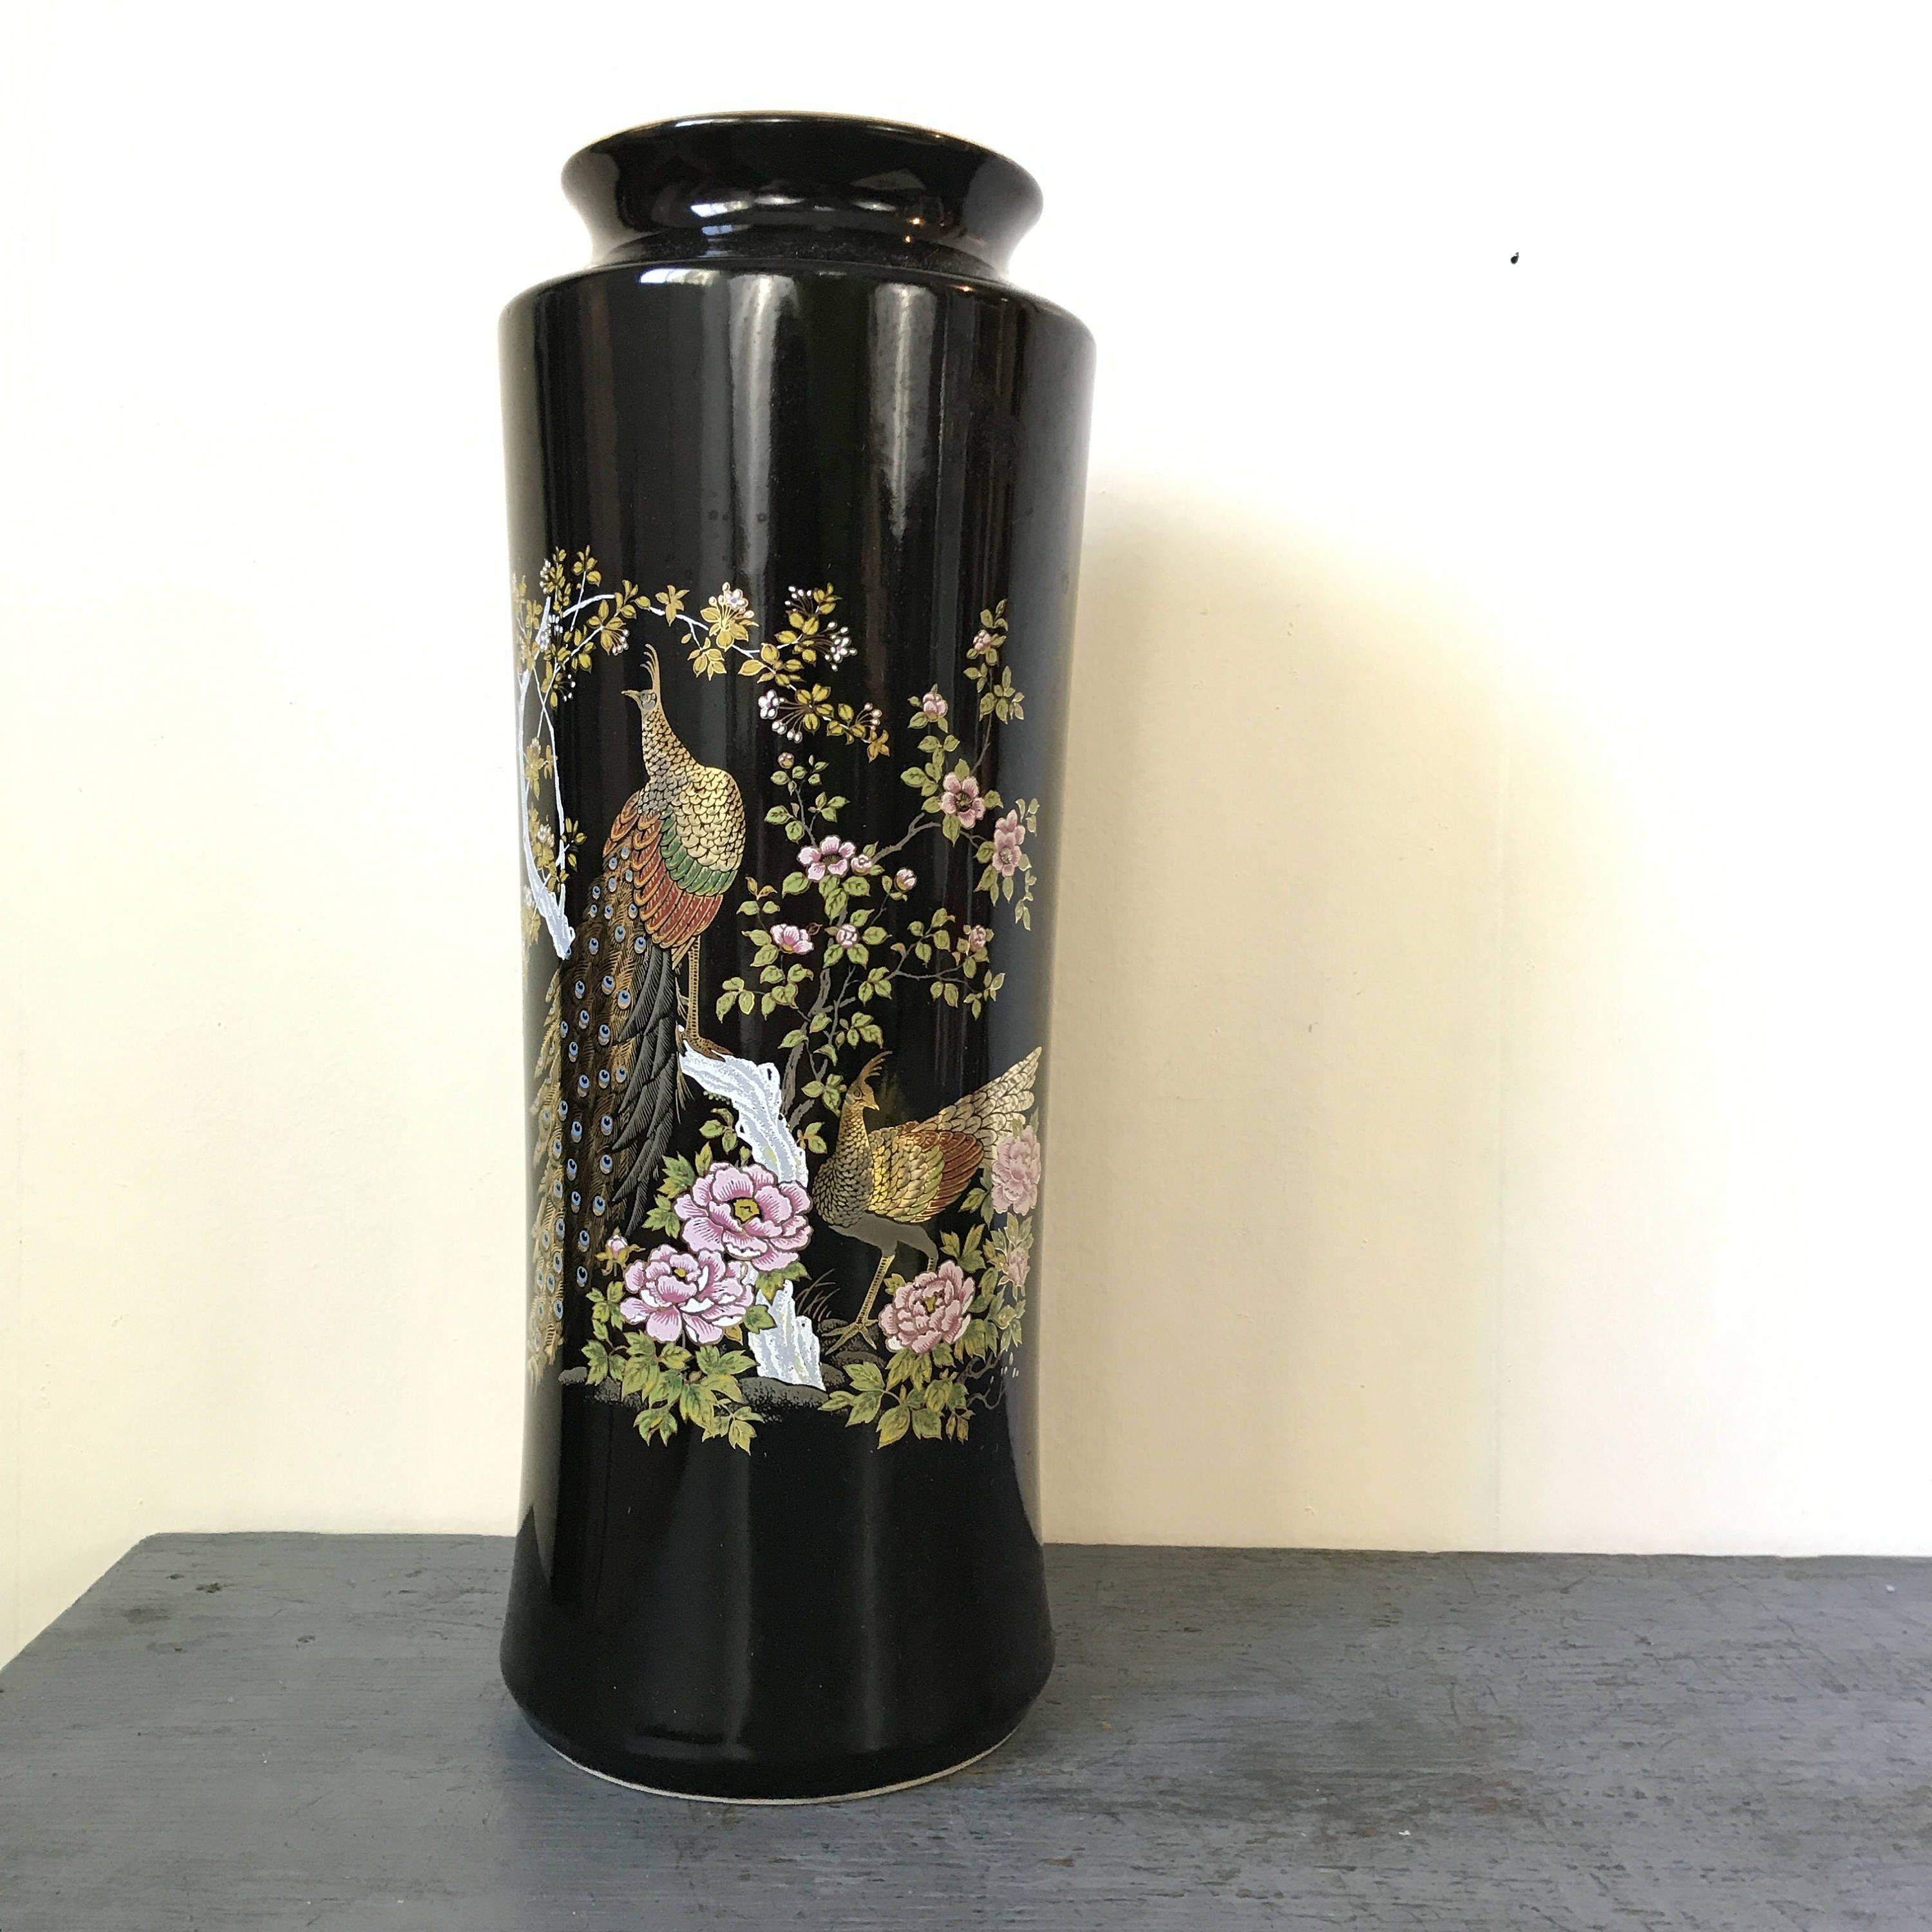 10 Recommended Vintage Brass Vase 2024 free download vintage brass vase of black ceramic vase images living room white vase elegant r 00 koi pertaining to black ceramic vase stock vintage ceramic vase japanese peacock floral asian chinoiserie 